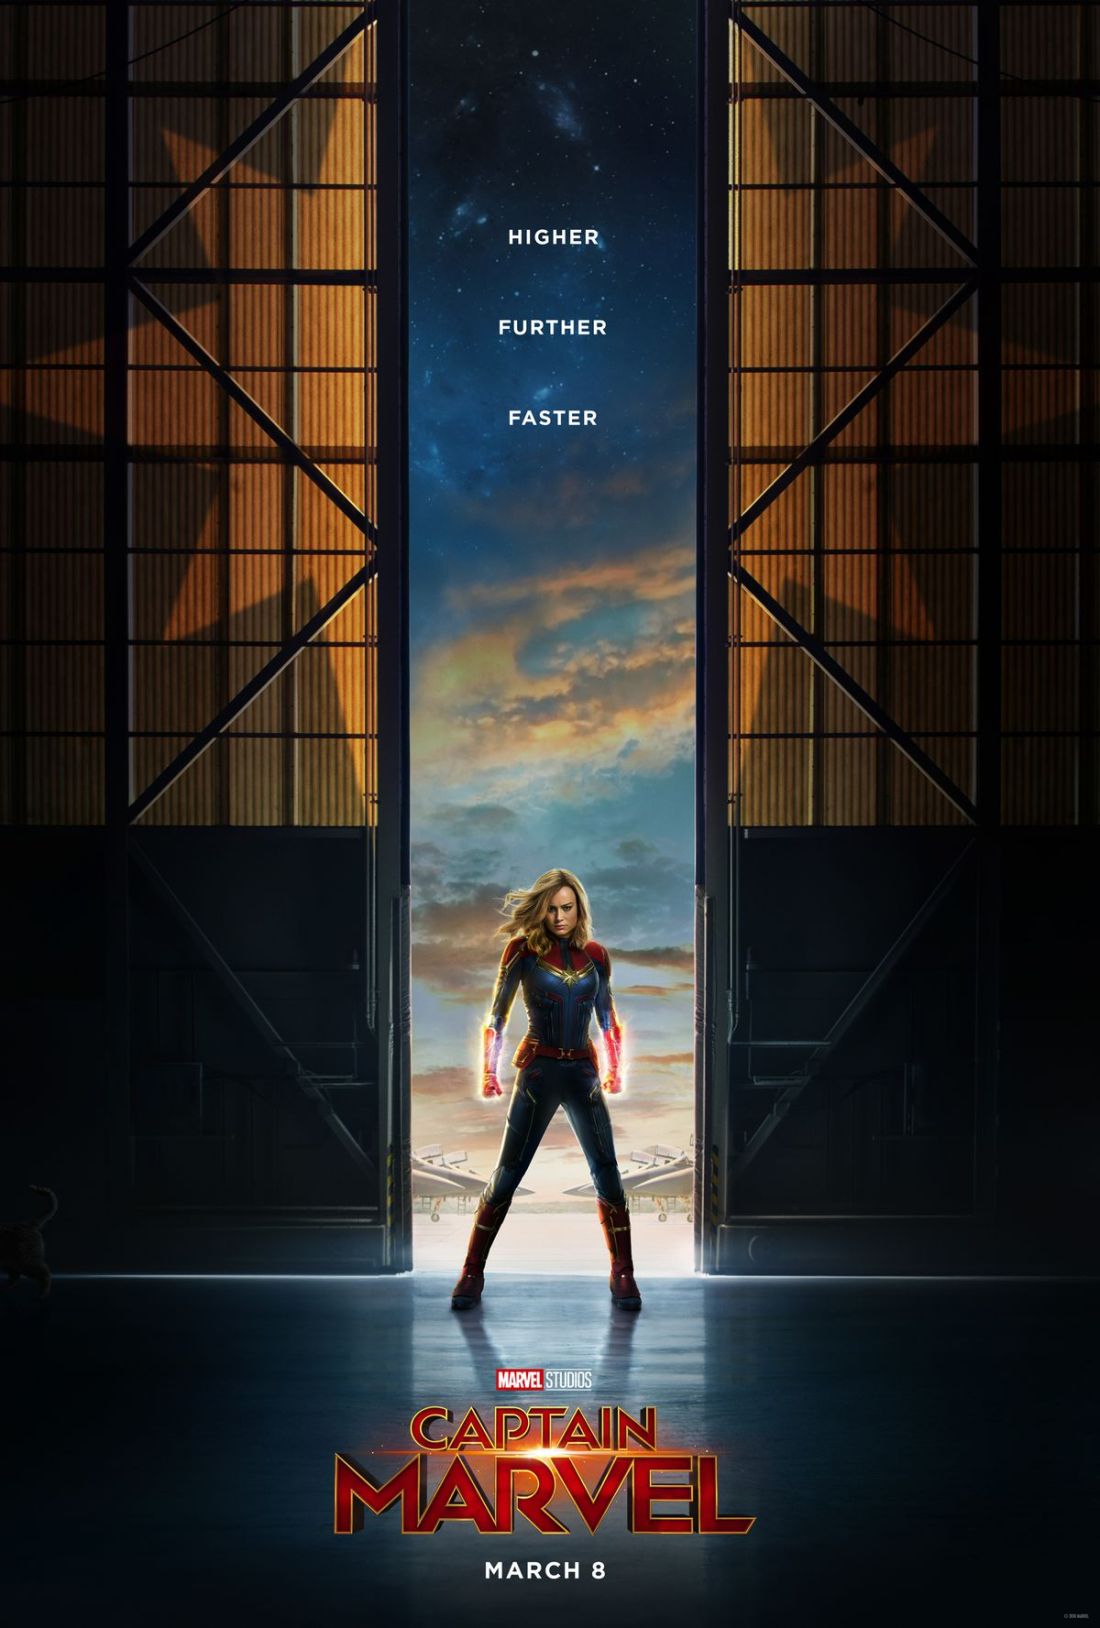 CaptainMarvel_poster_1200x1777